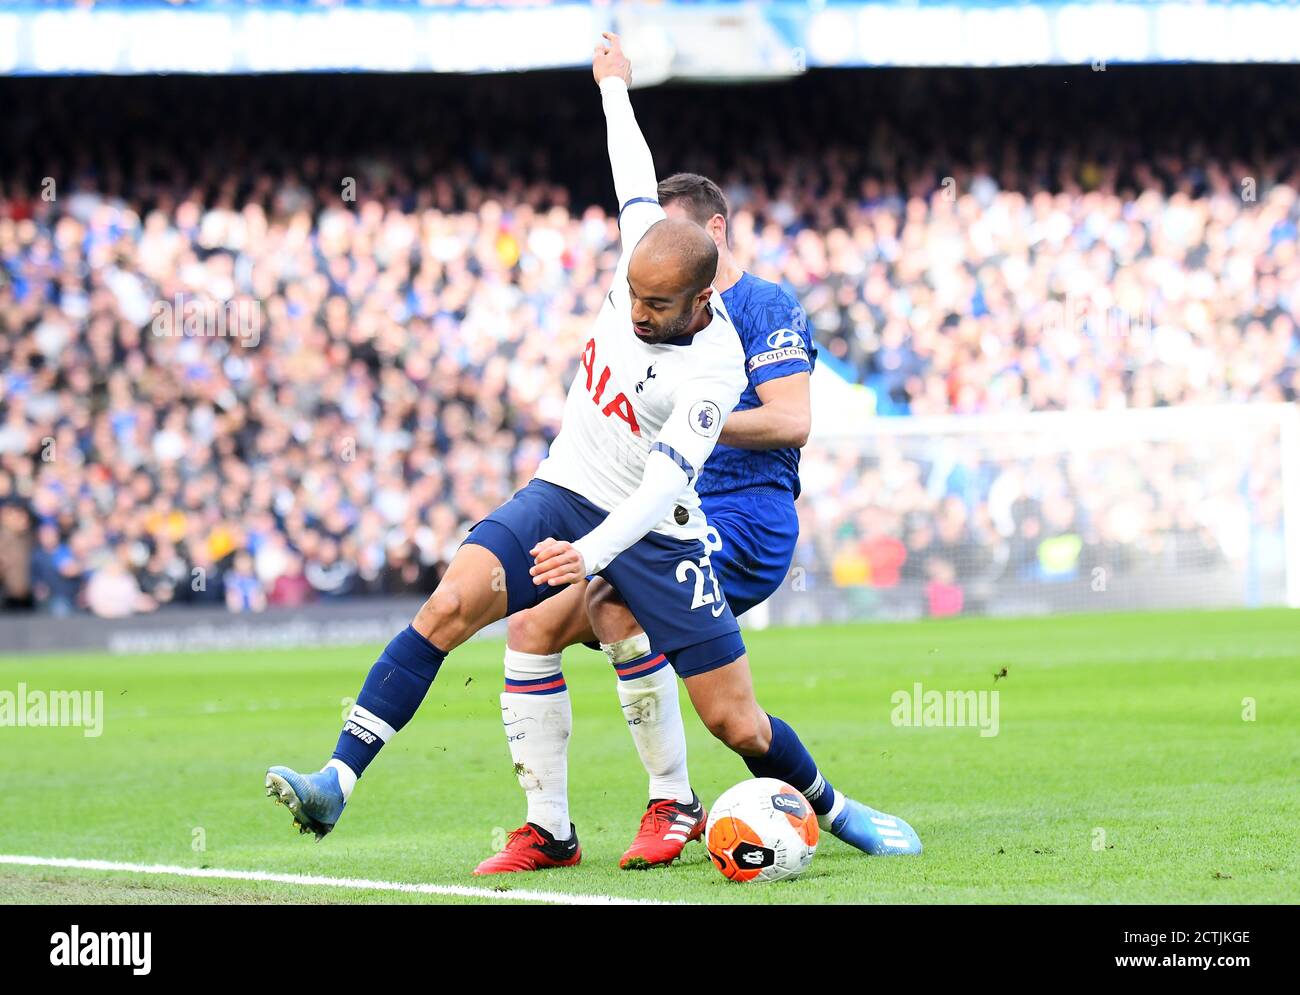 LONDON, ENGLAND - FEBRUARY 22, 2020: Lucas Moura of Tottenham pictured during the 2019/20 Premier League game between Chelsea FC and Tottenham Hotspur FC at Stamford Bridge. Stock Photo